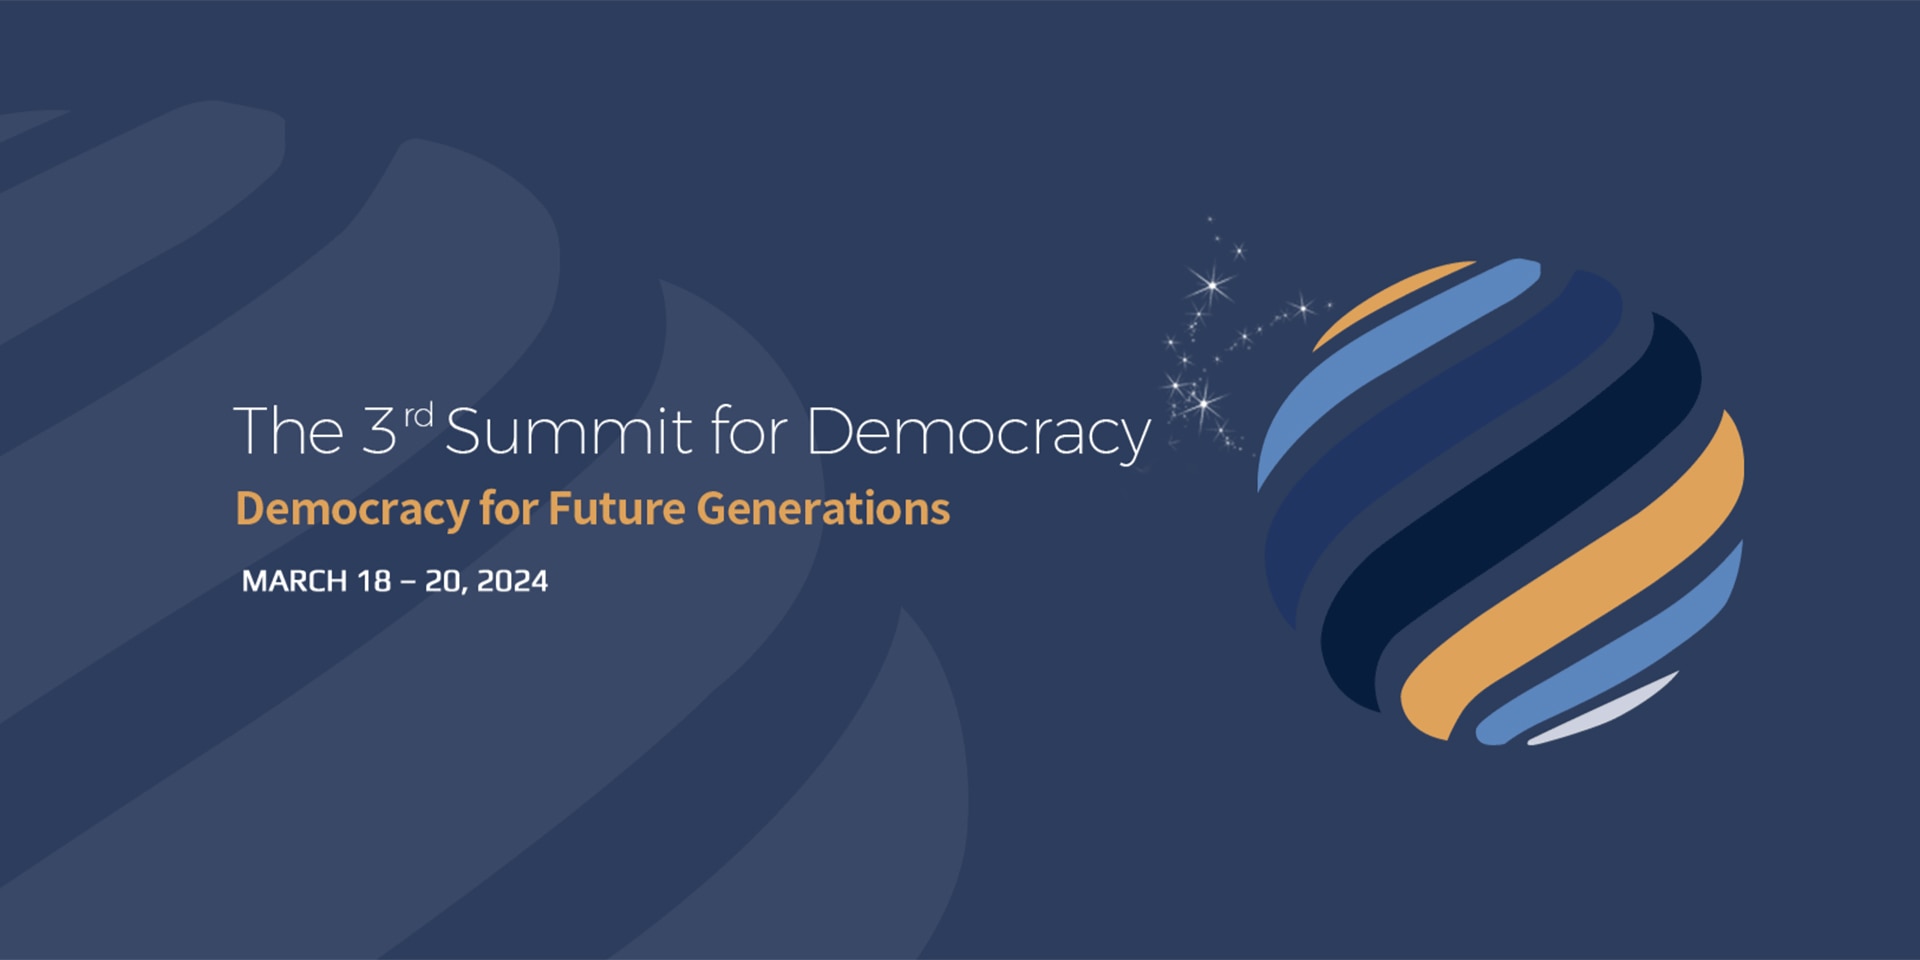 A stylised globe is depicted in strokes of yellow, blue and black. The accompanying text reads 'Democracy for Future Generations', the theme of the Summit for Democracy in Seoul.